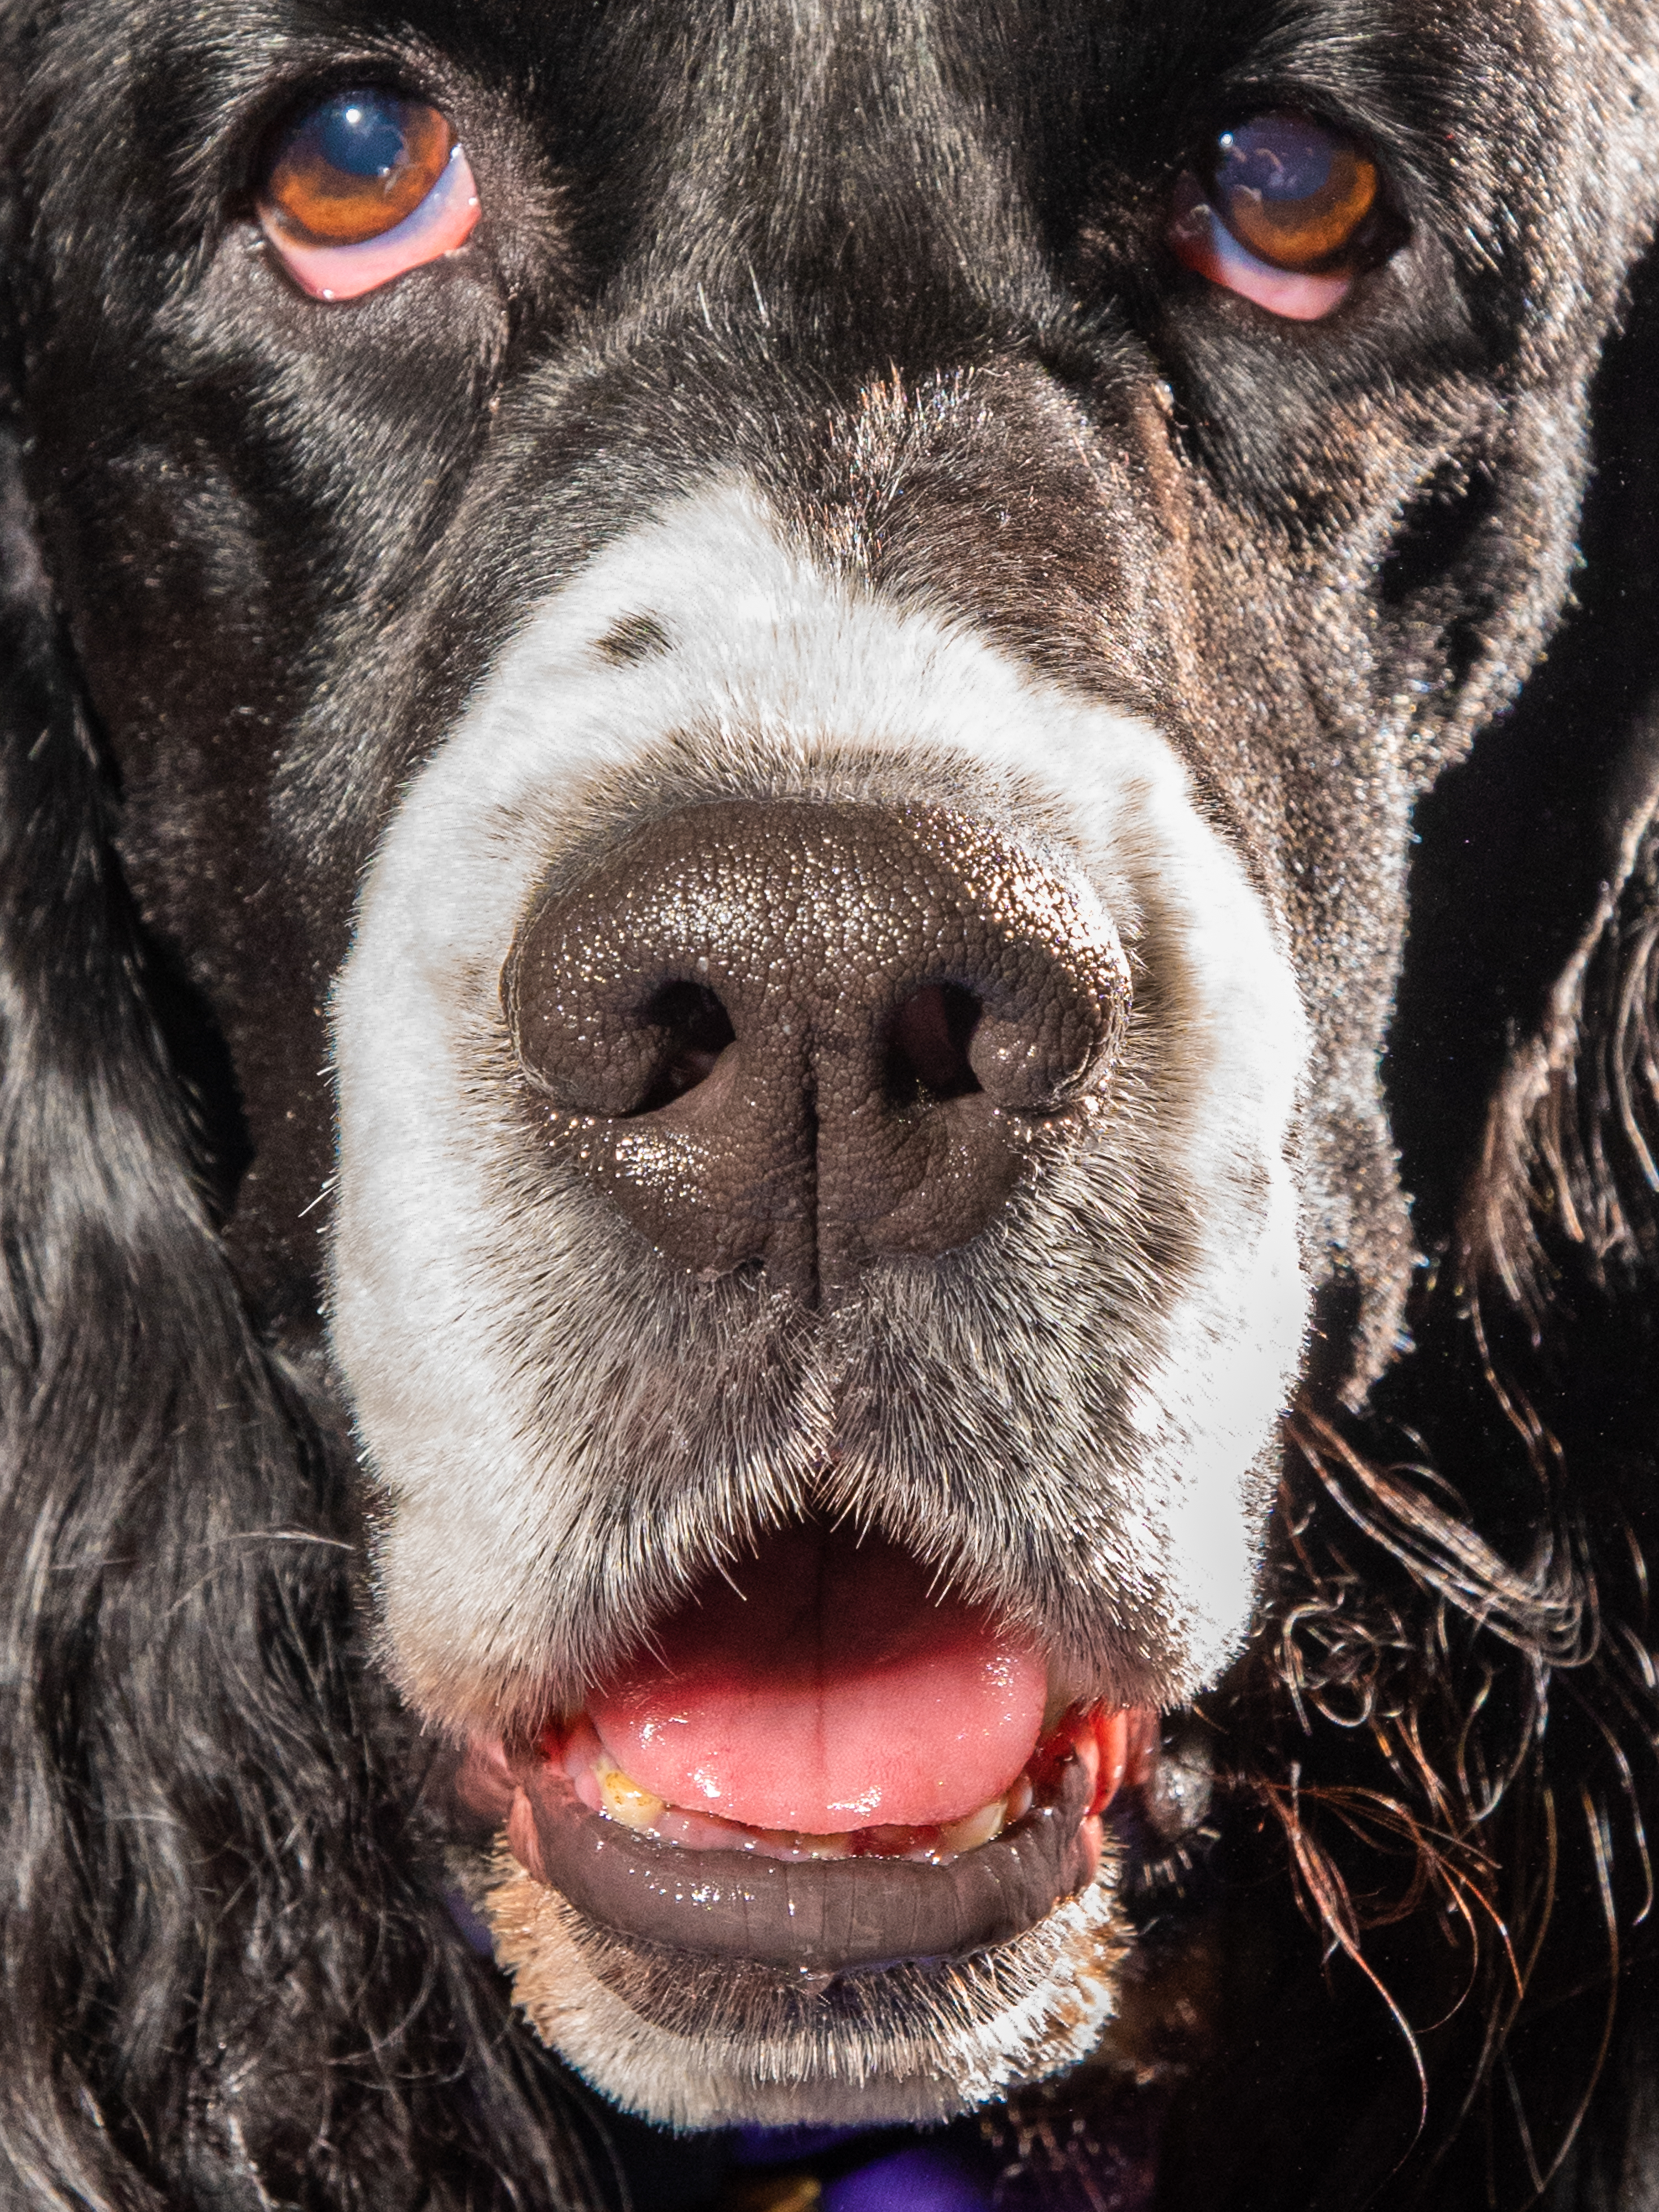 Capo,” a Springer Spaniel, who according to their owner is the  Boss of Nothing,” posing for a photo at the Westminster Dog Show in New York City on Feb. 10, 2020.